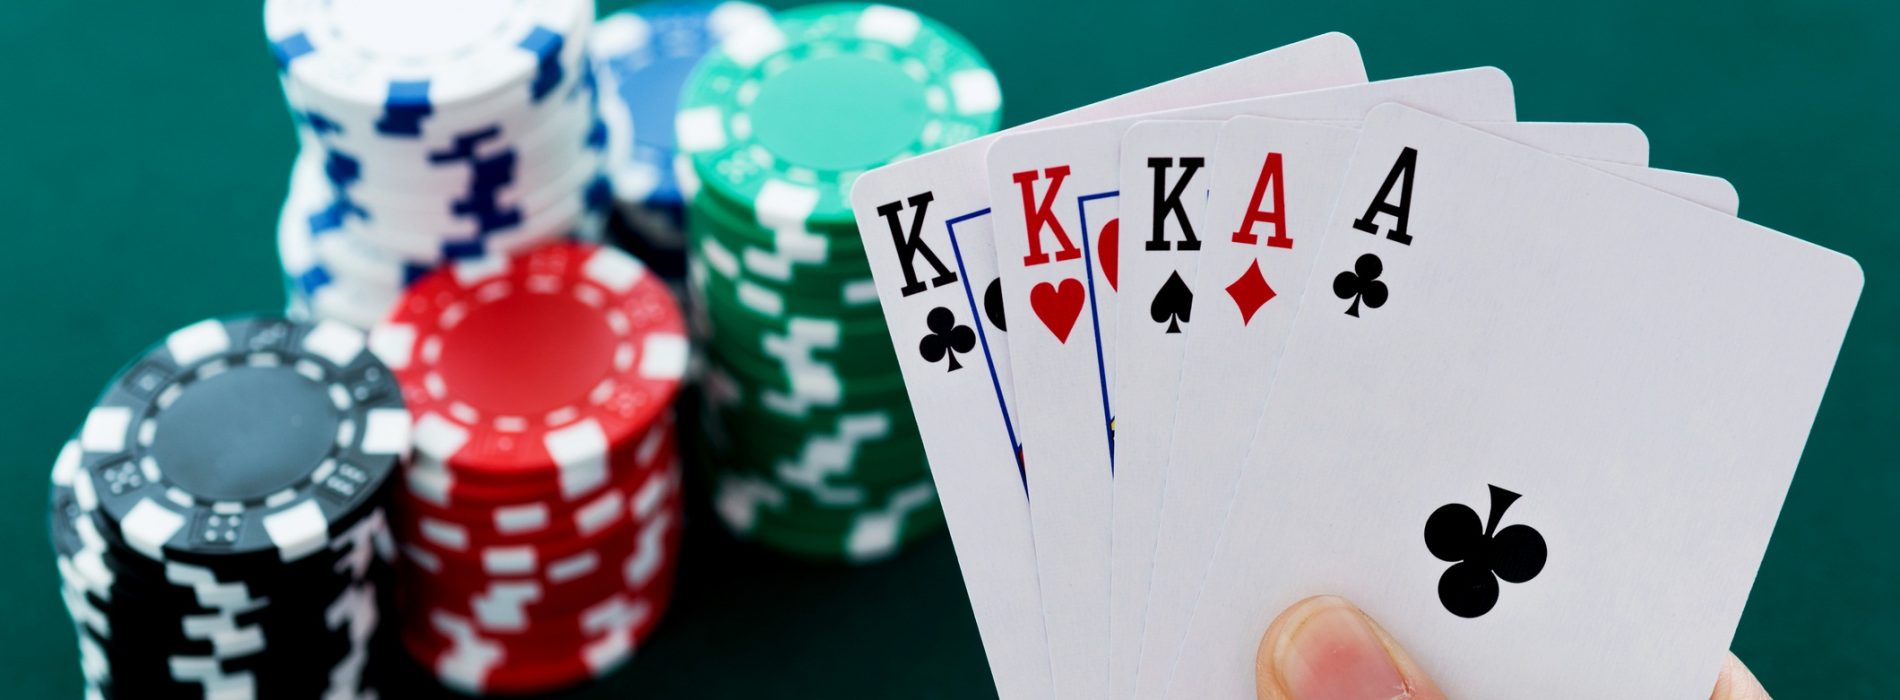 Play poker online and make real money without investing a large capital